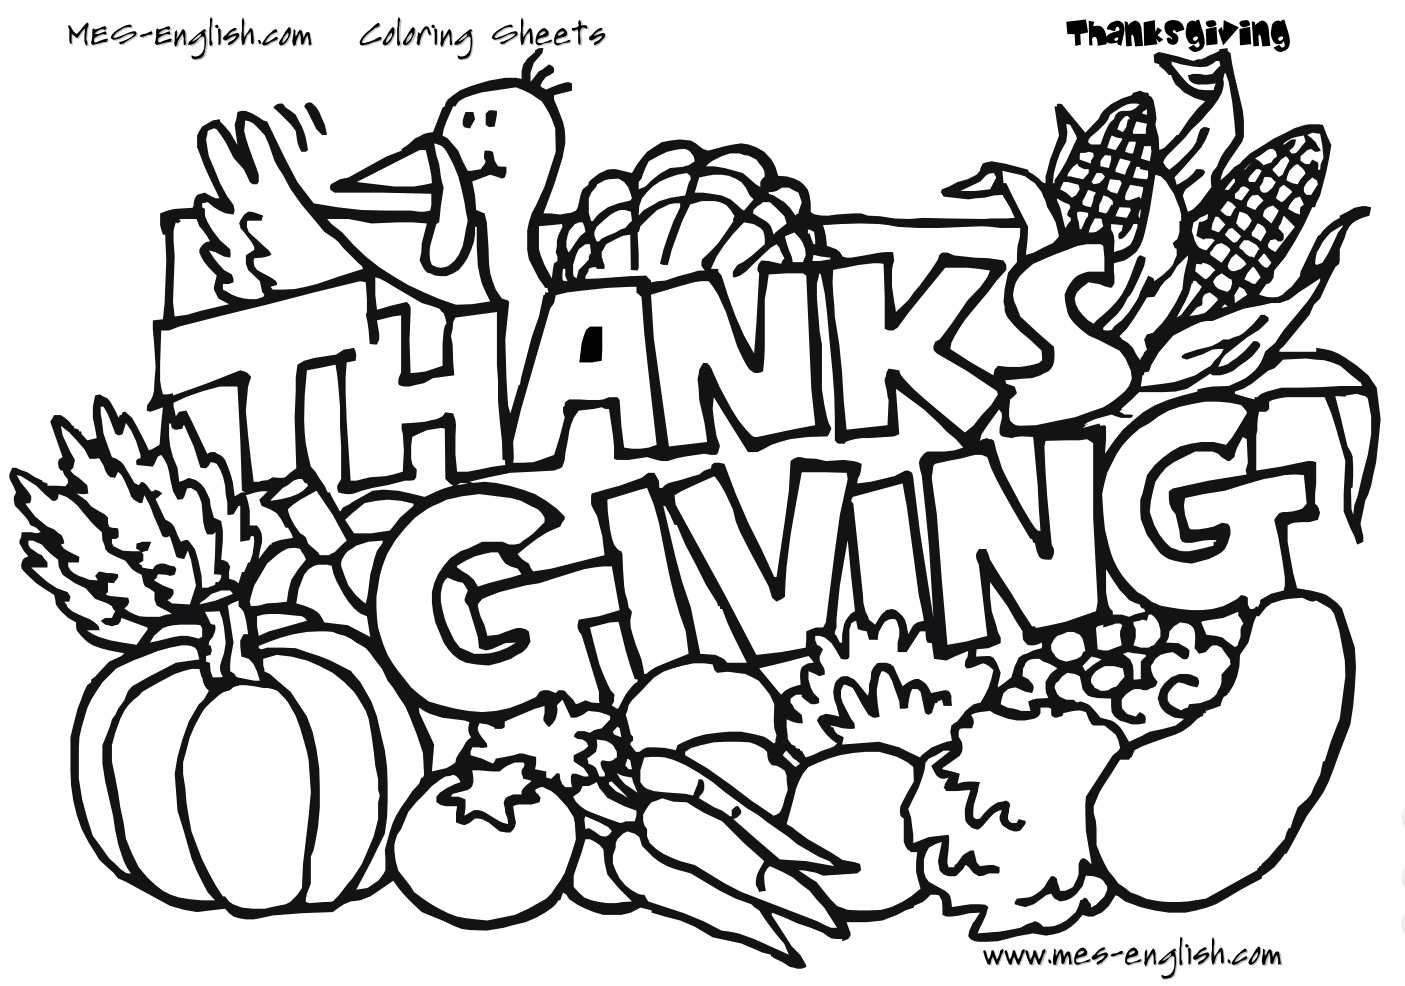 Free Printable Thanksgiving Coloring Pages 2018 | Happy Thanksgiving - Free Printable Coloring Sheets Thanksgiving